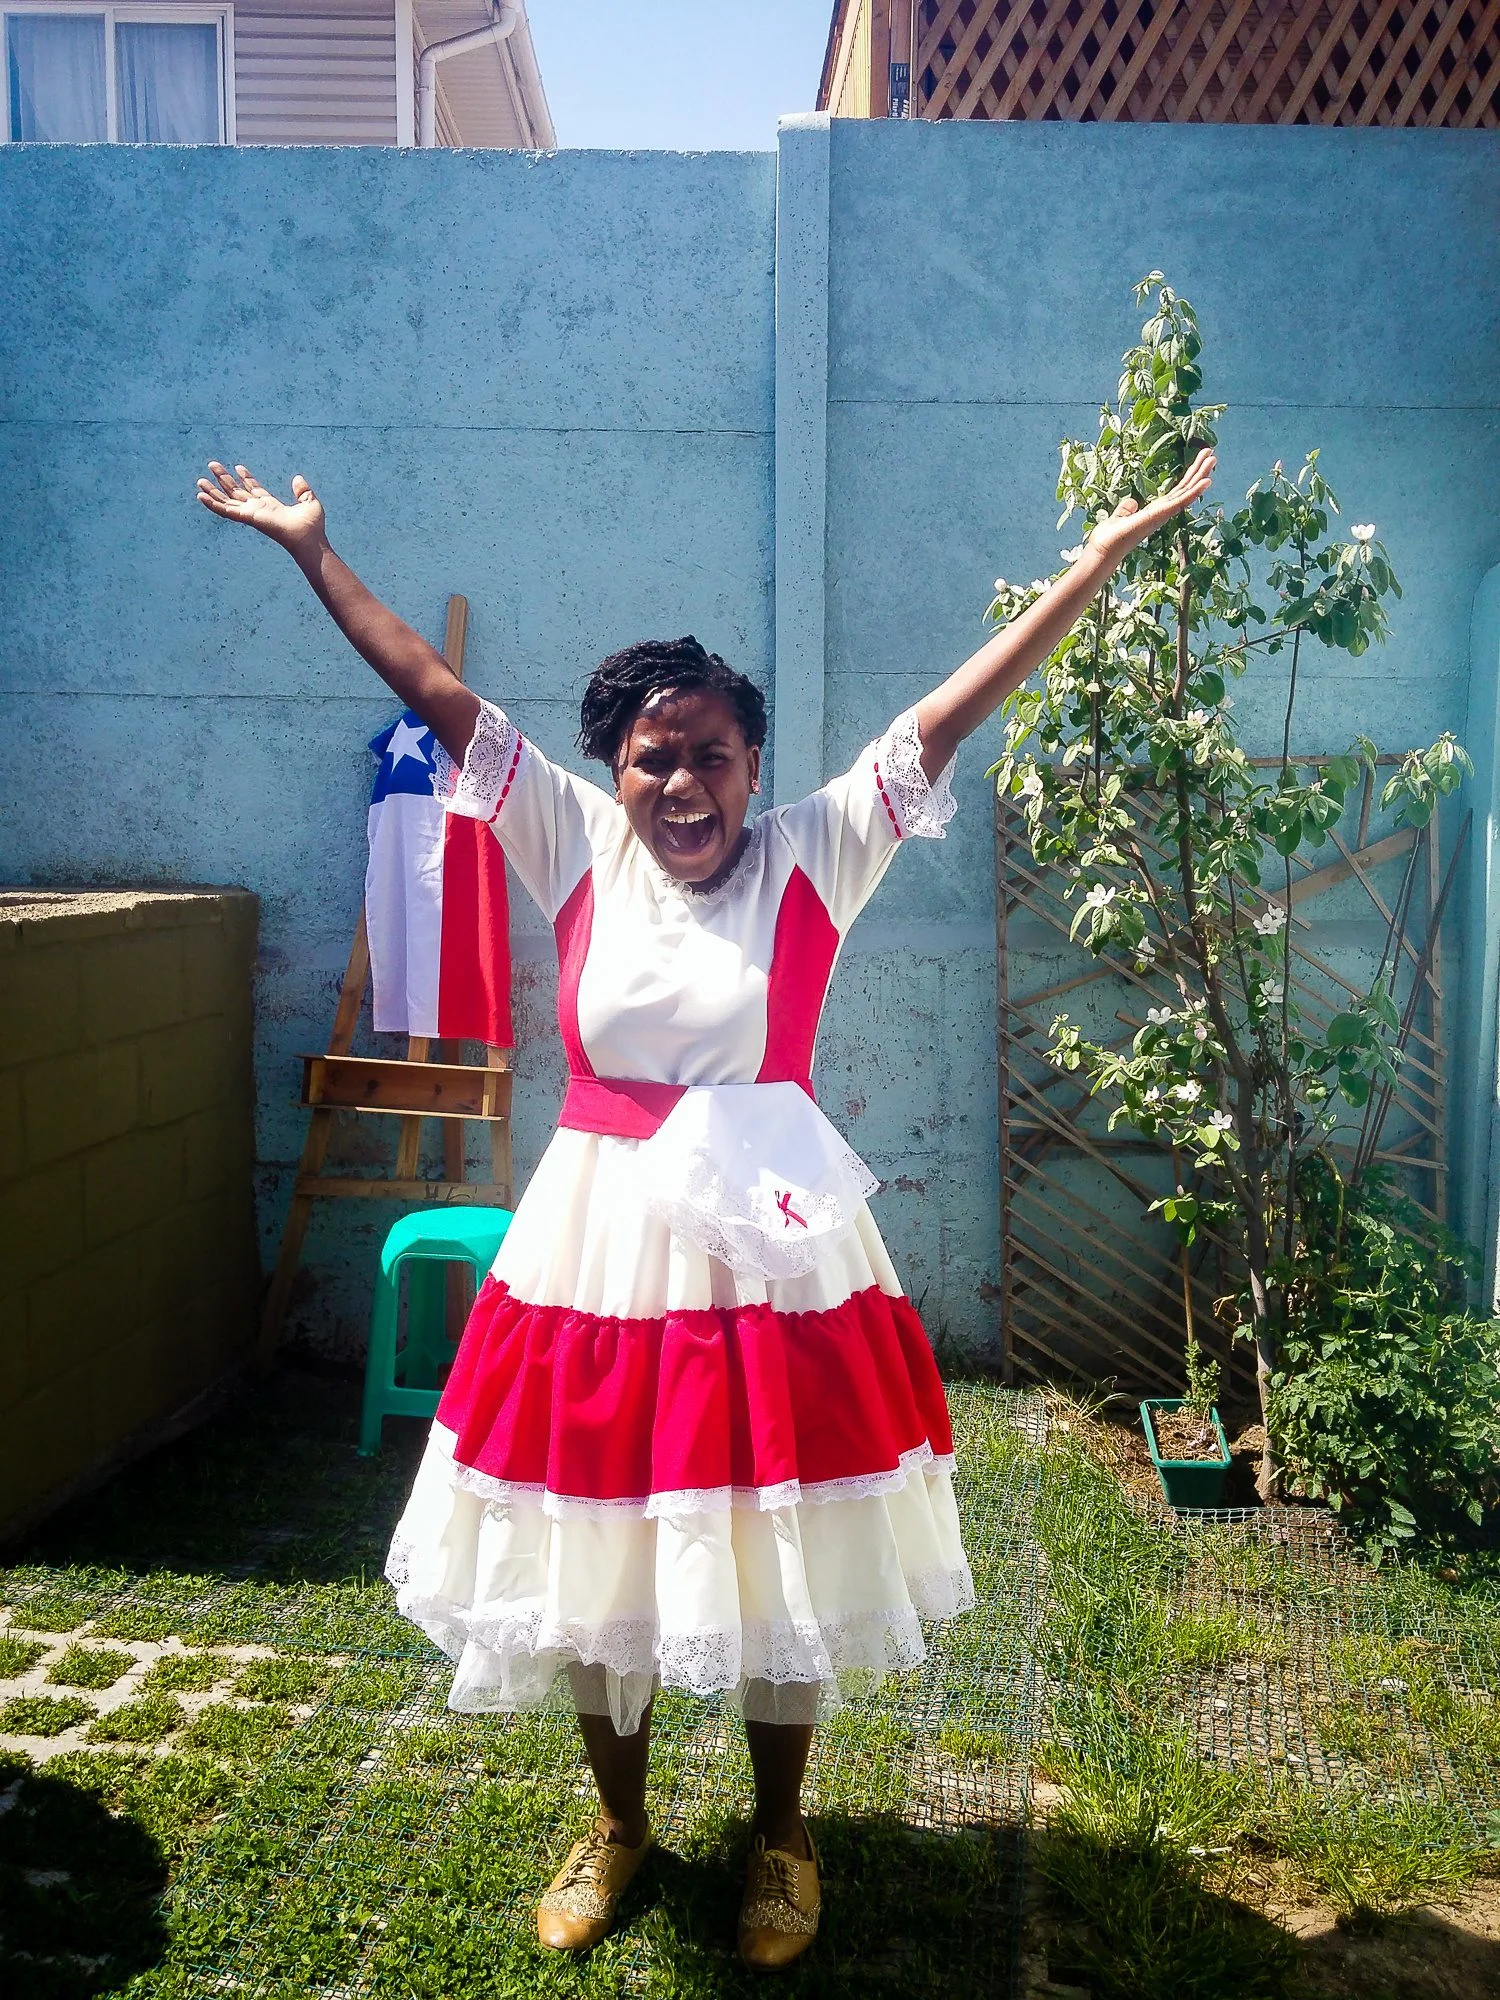 Celebrating Chile's Independence Day in September (in local dress of a Cueca dancer courtesy of Steph's host brother's wife).